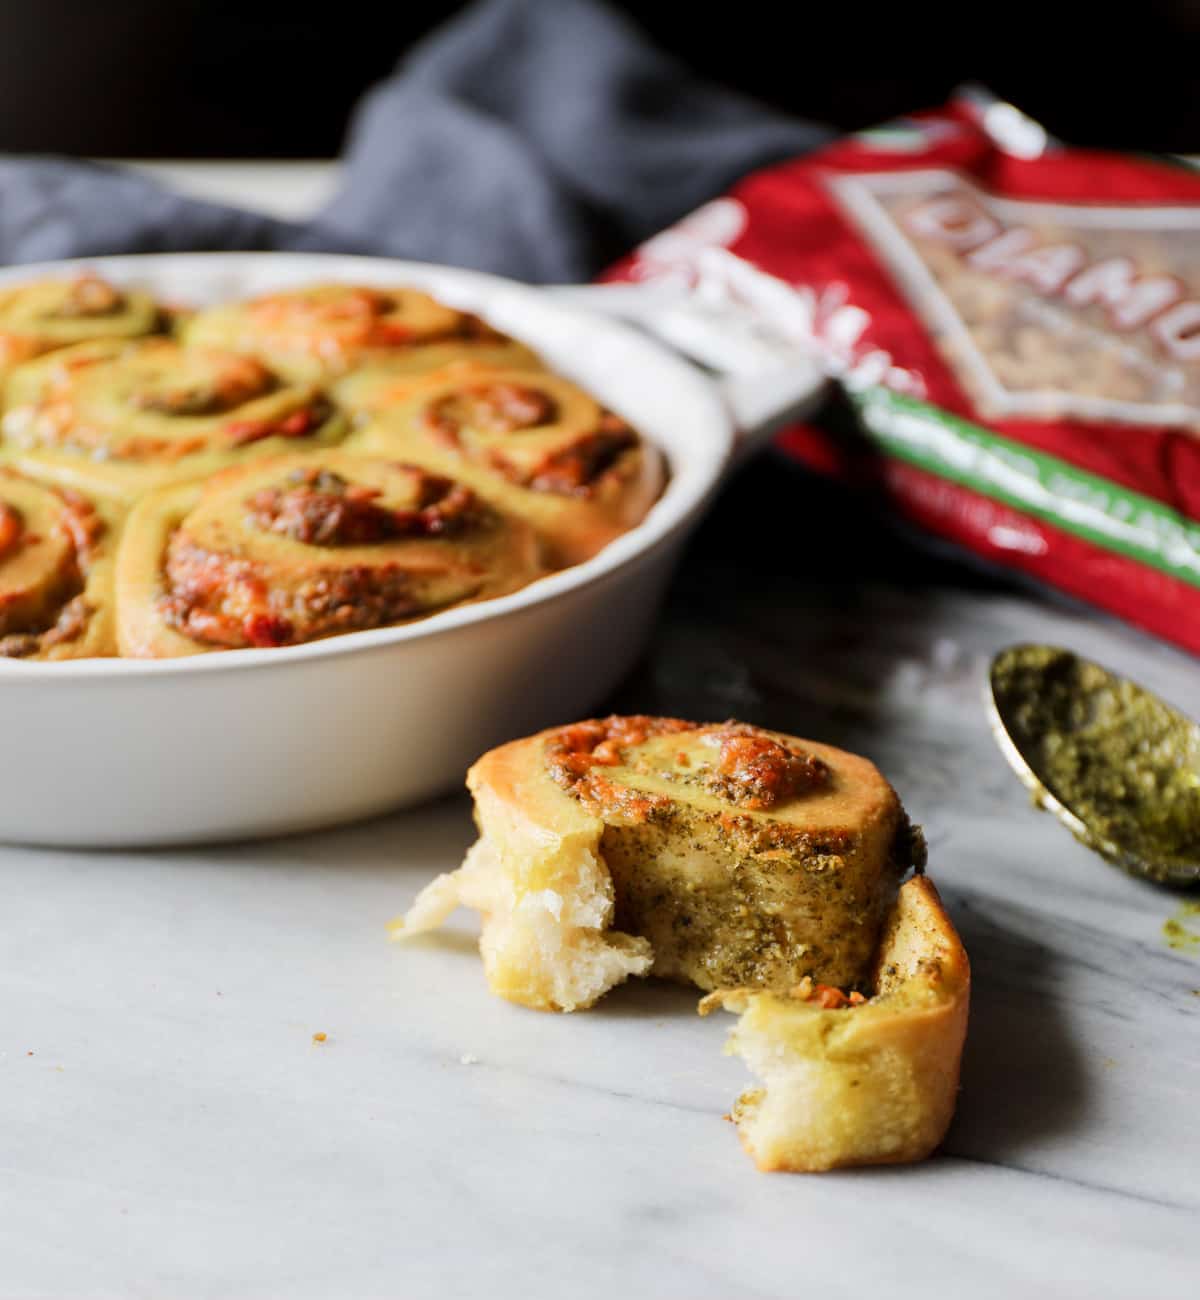 Pesto + Red Pepper Beer Buns from Displaced housewife